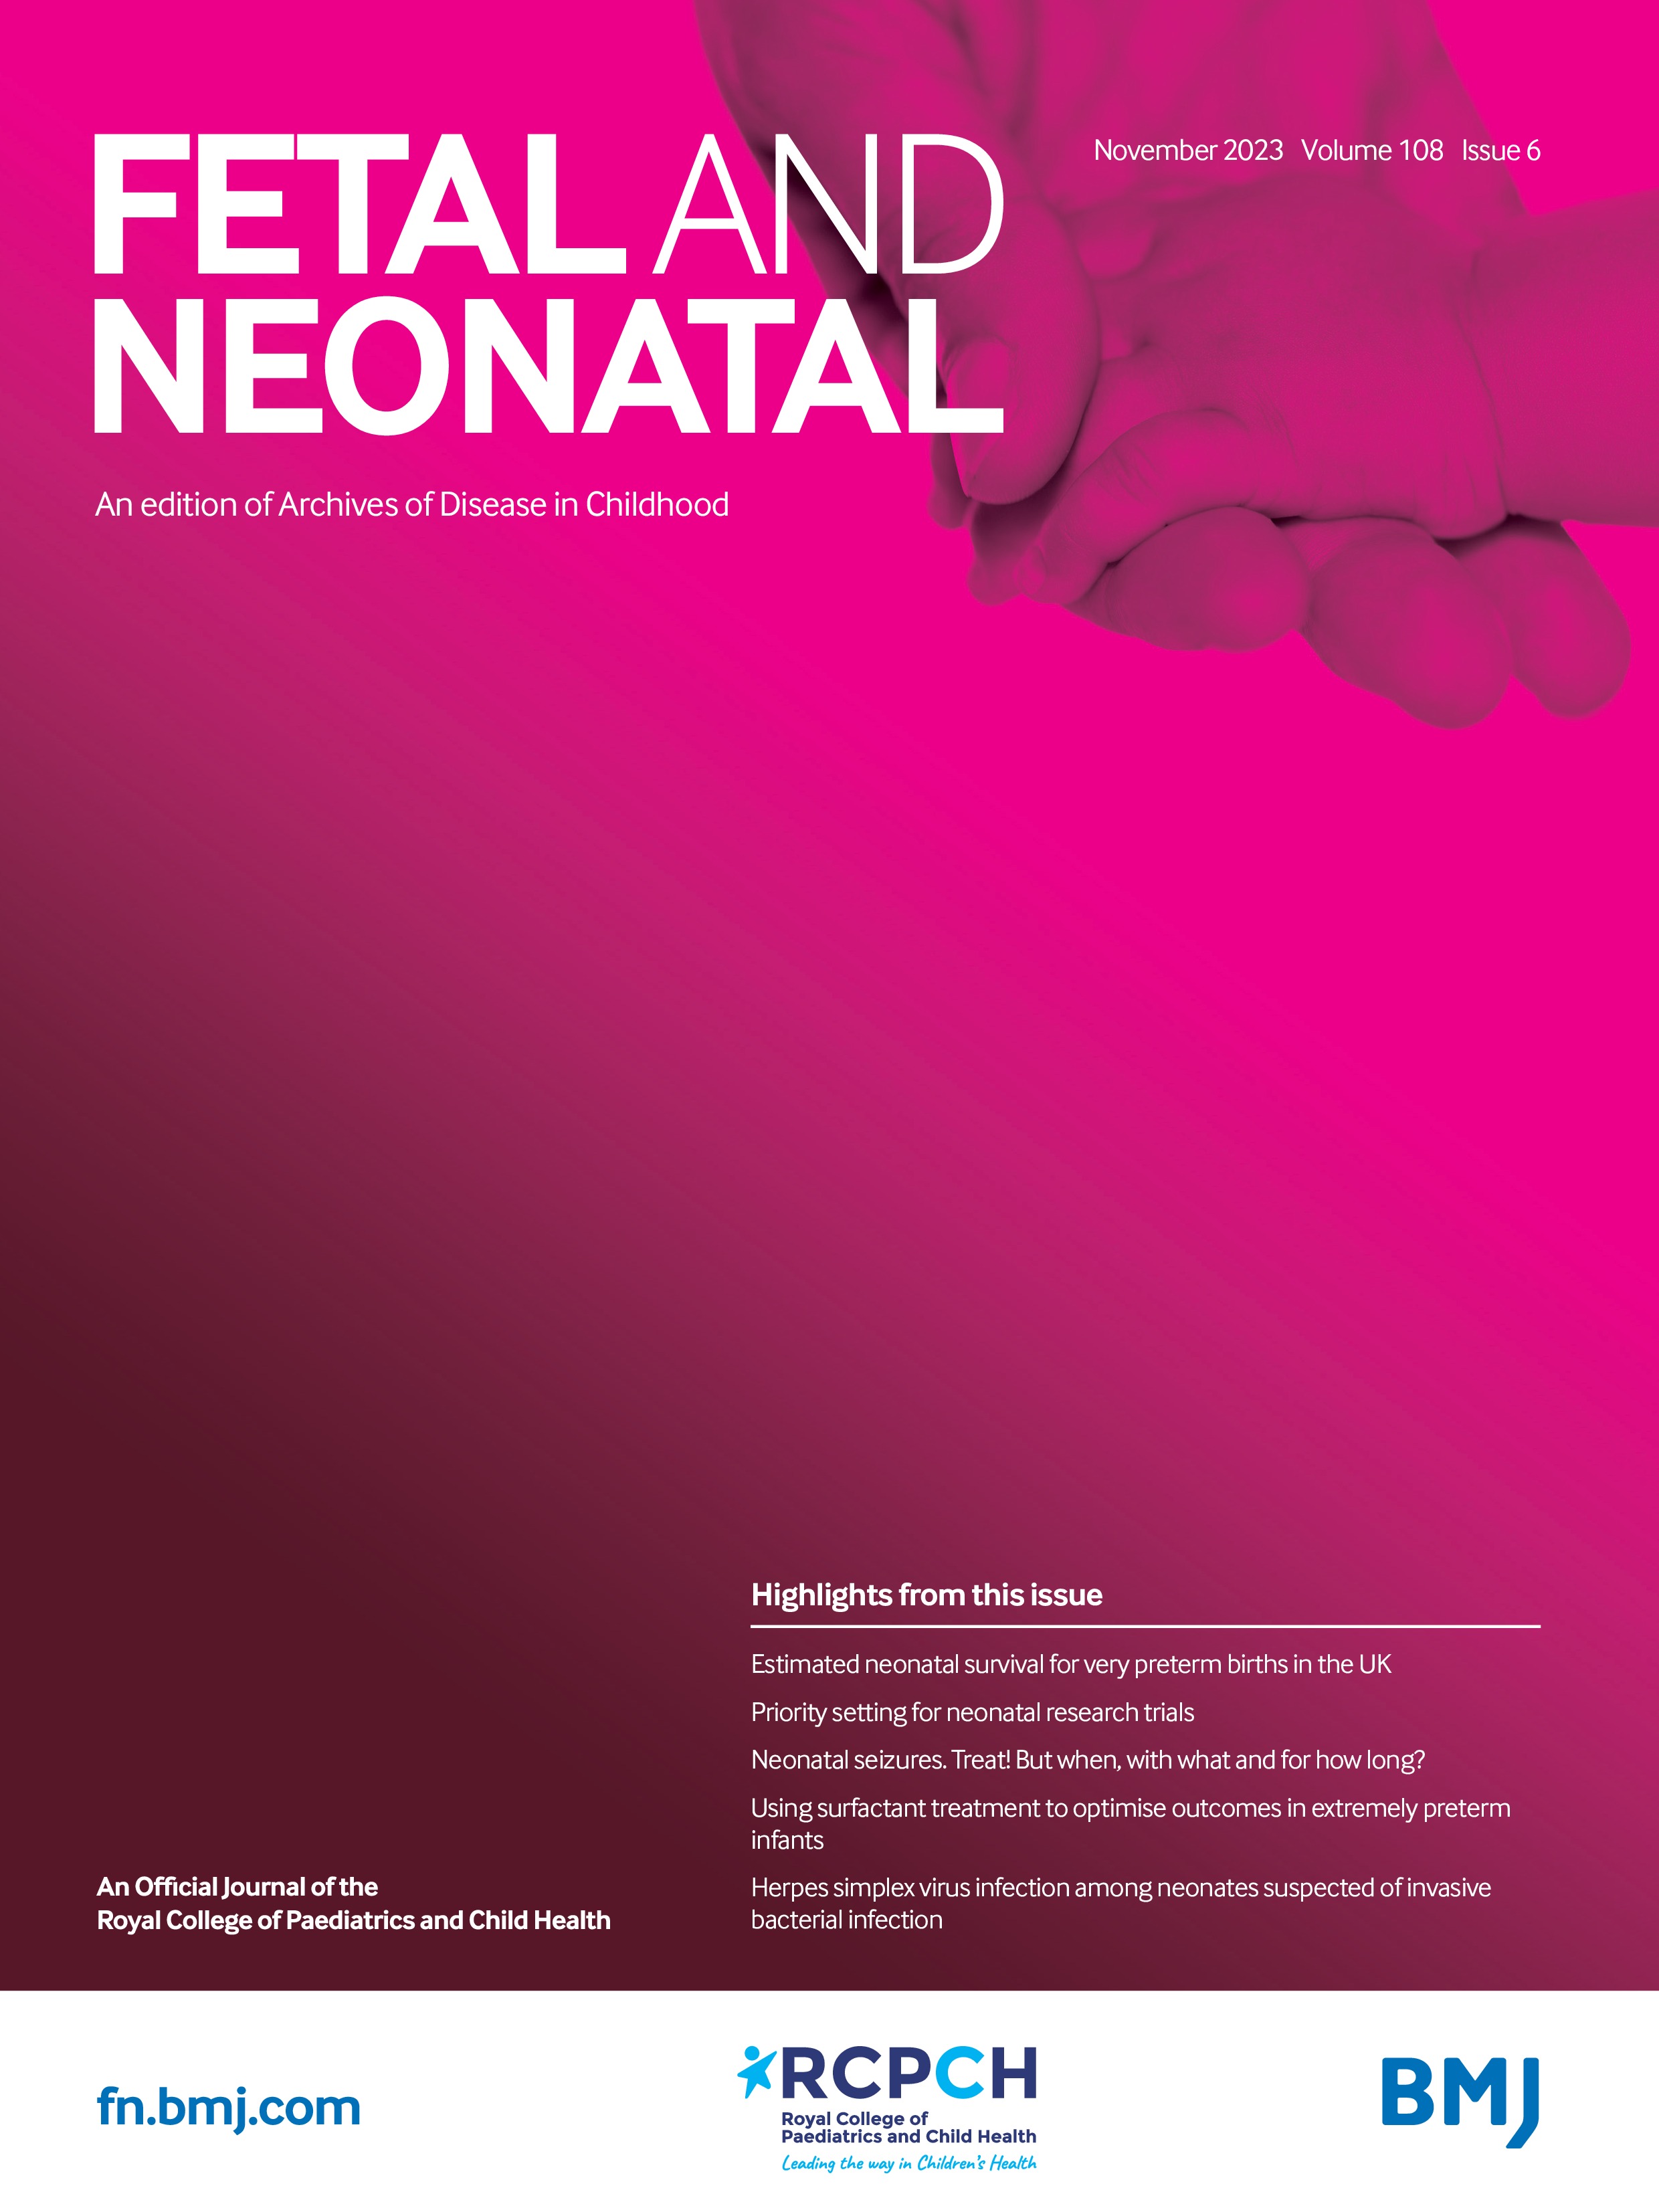 Clinical usefulness of reintubation criteria in extremely preterm infants: a cohort study